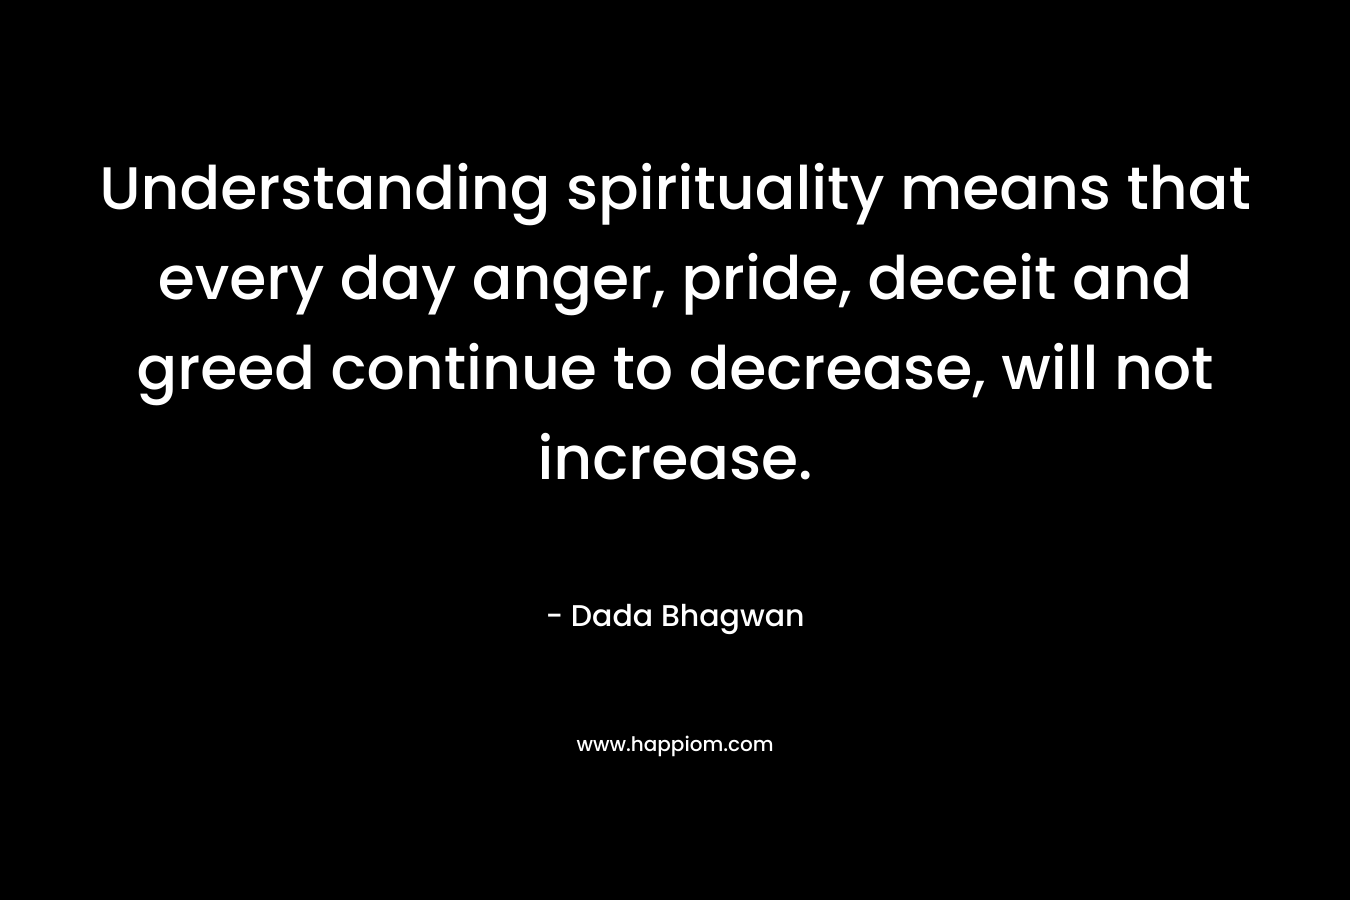 Understanding spirituality means that every day anger, pride, deceit and greed continue to decrease, will not increase.